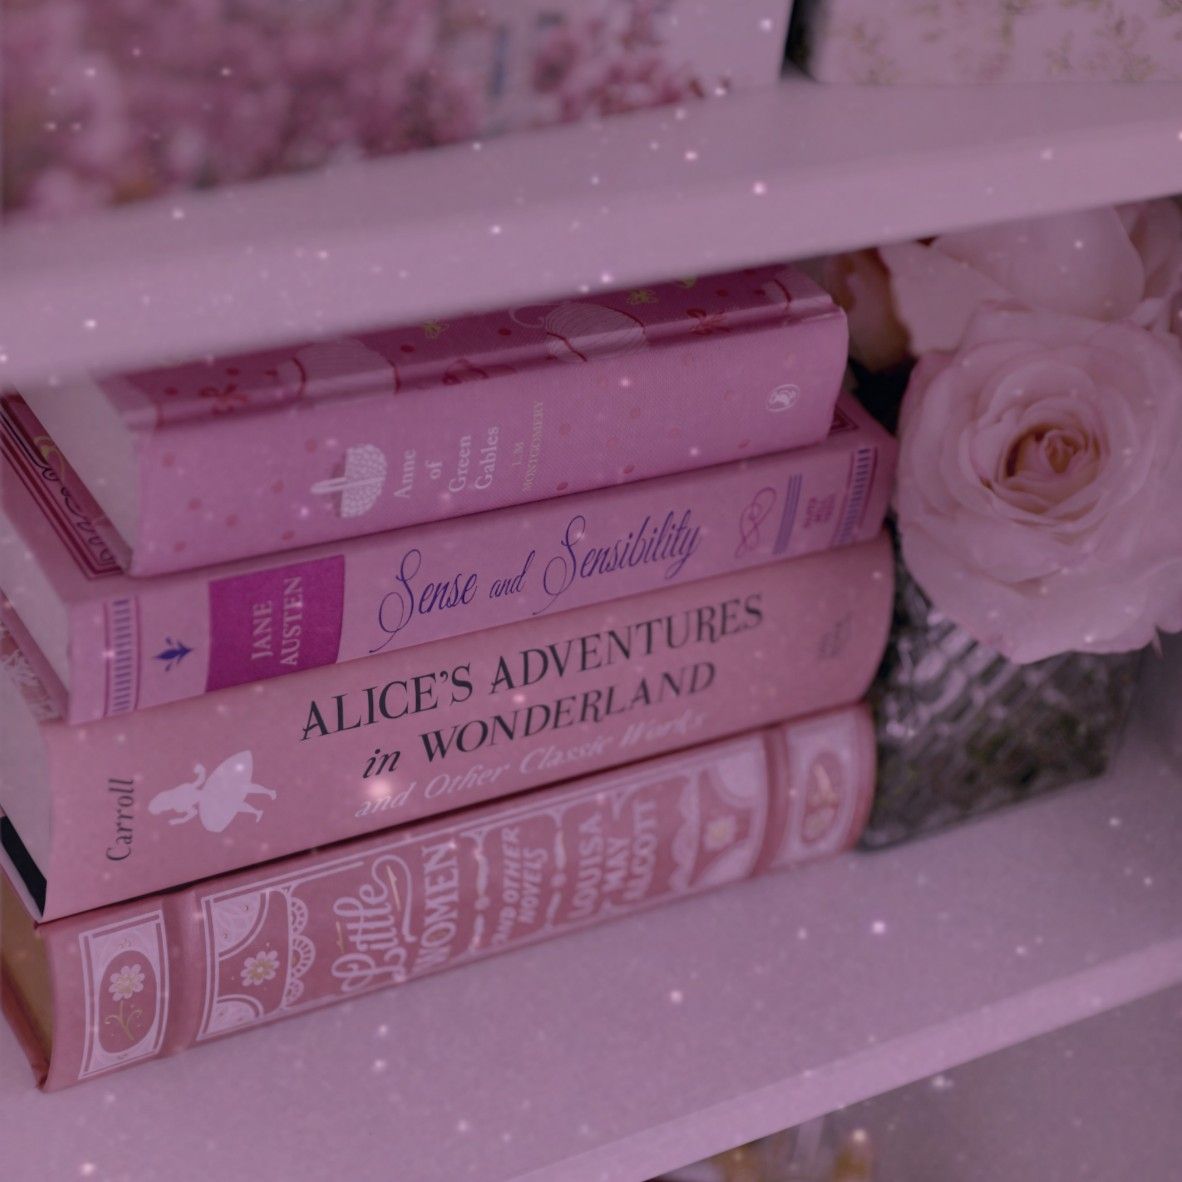 Pink Books Wallpapers